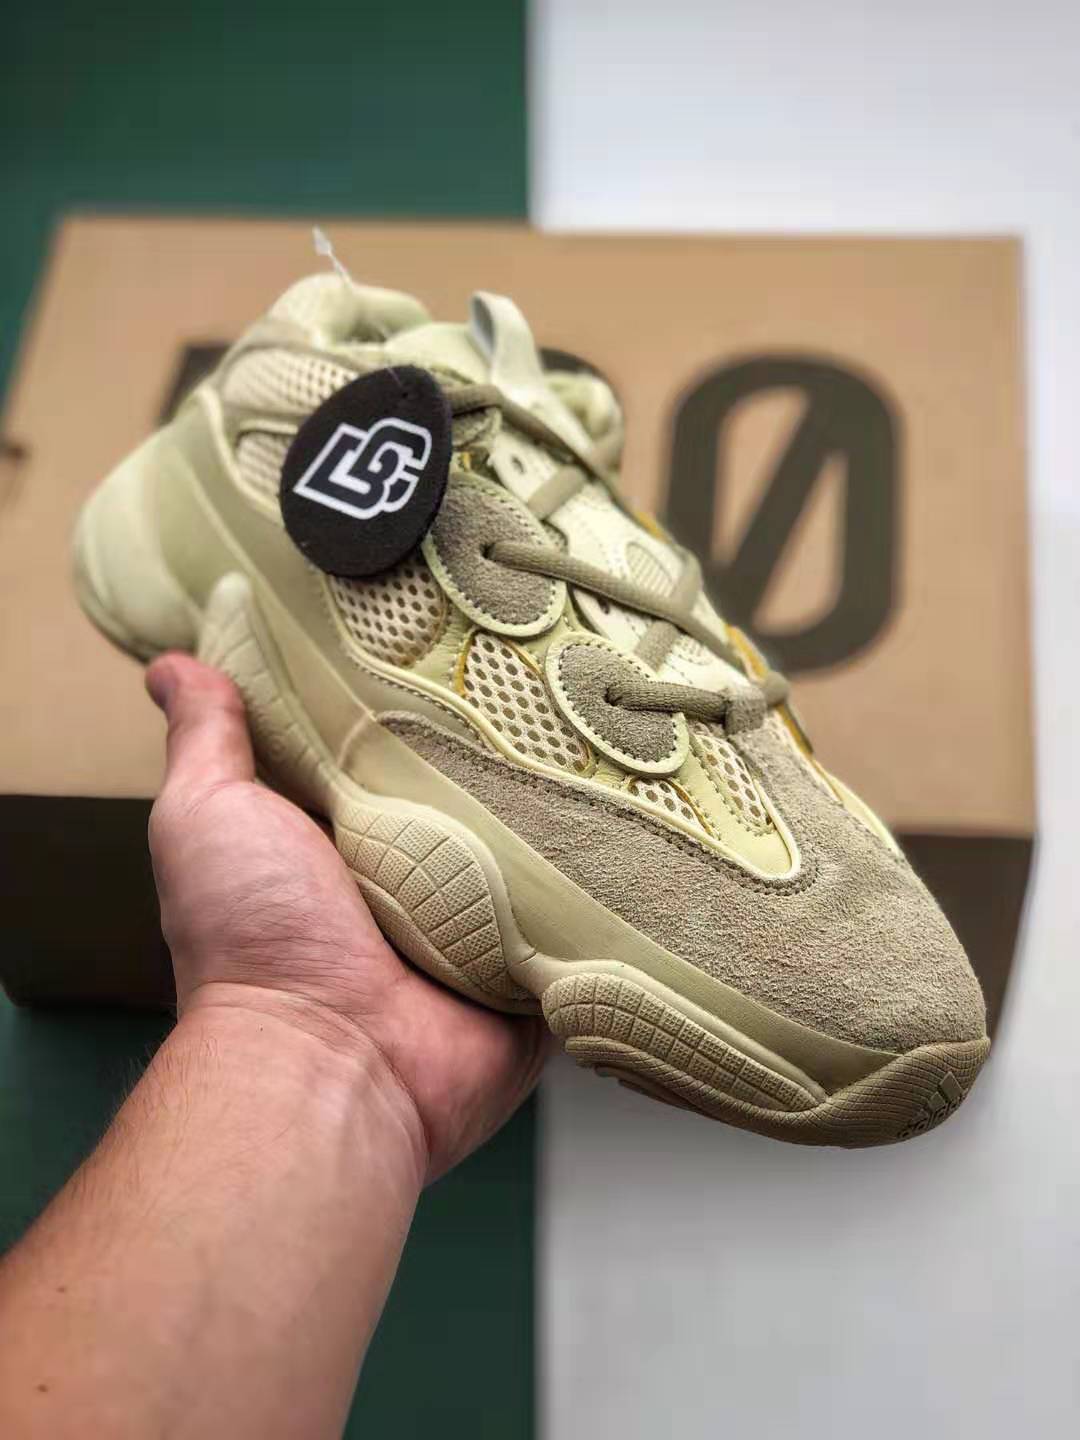 Adidas Yeezy 500 Super Moon Yellow DB2966 - Limited Edition Sneakers